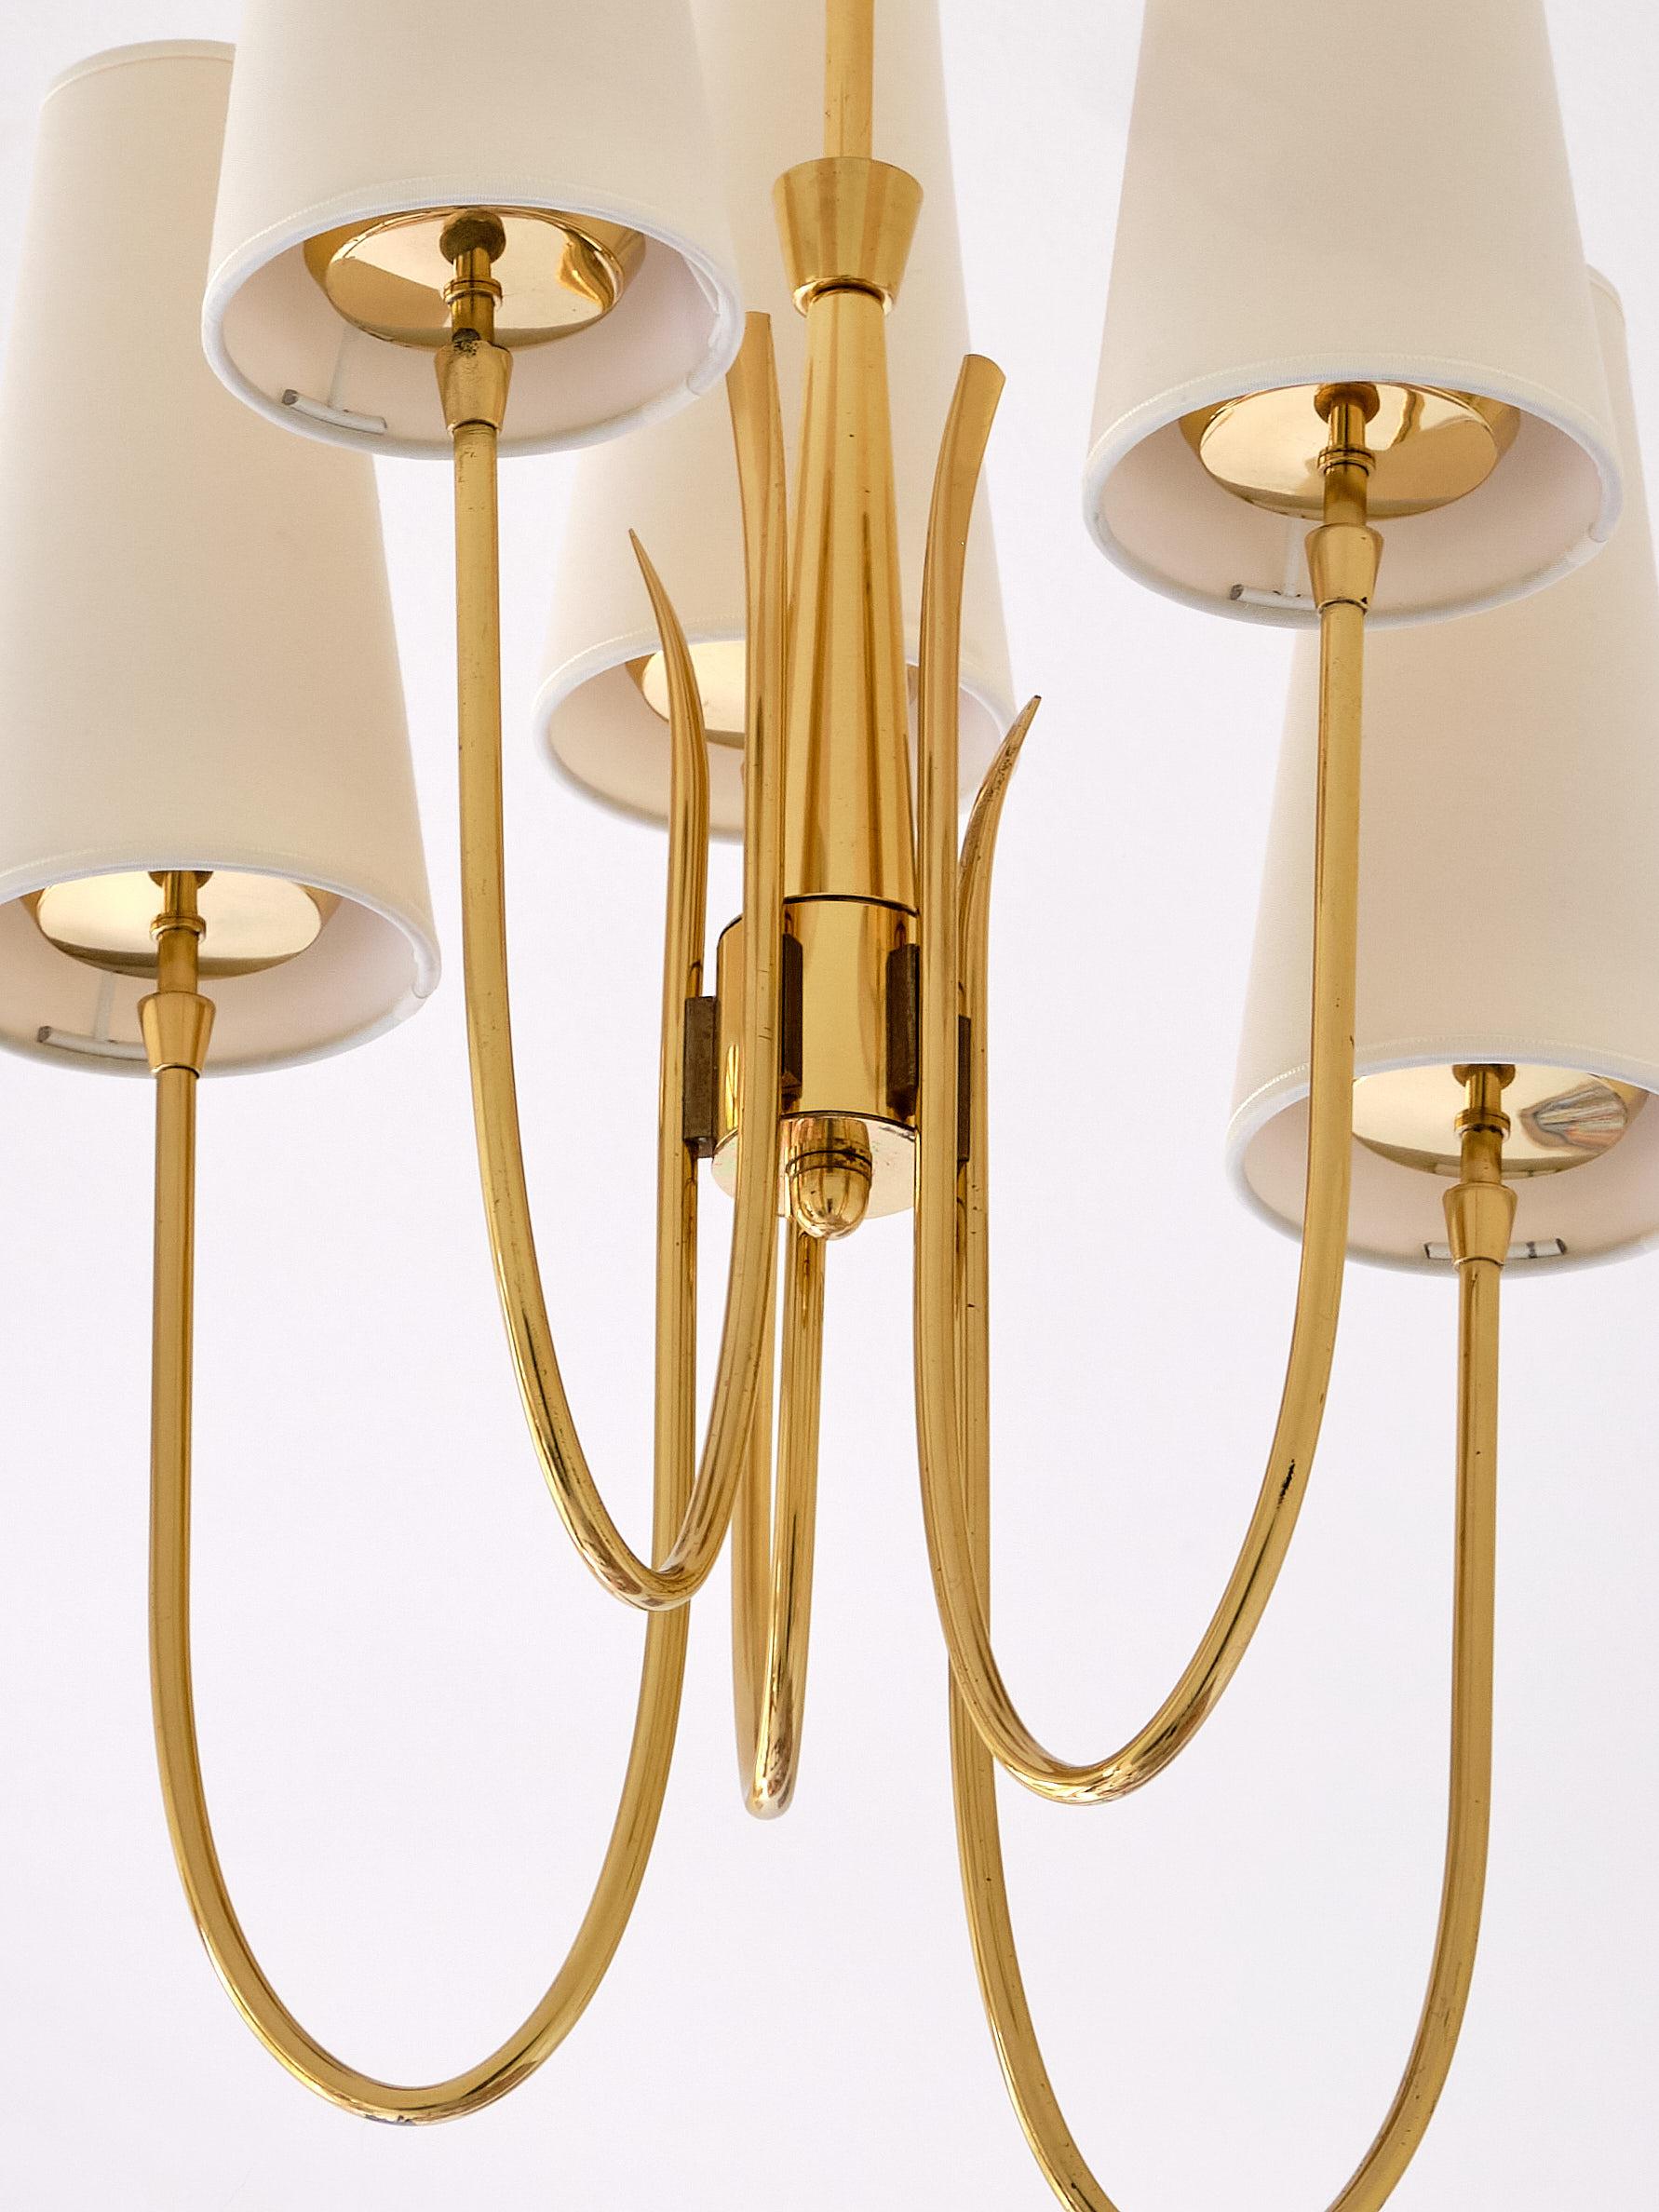 Guglielmo Ulrich Attributed Five Arm Chandelier, Brass and Fabric, Italy, 1940s 1